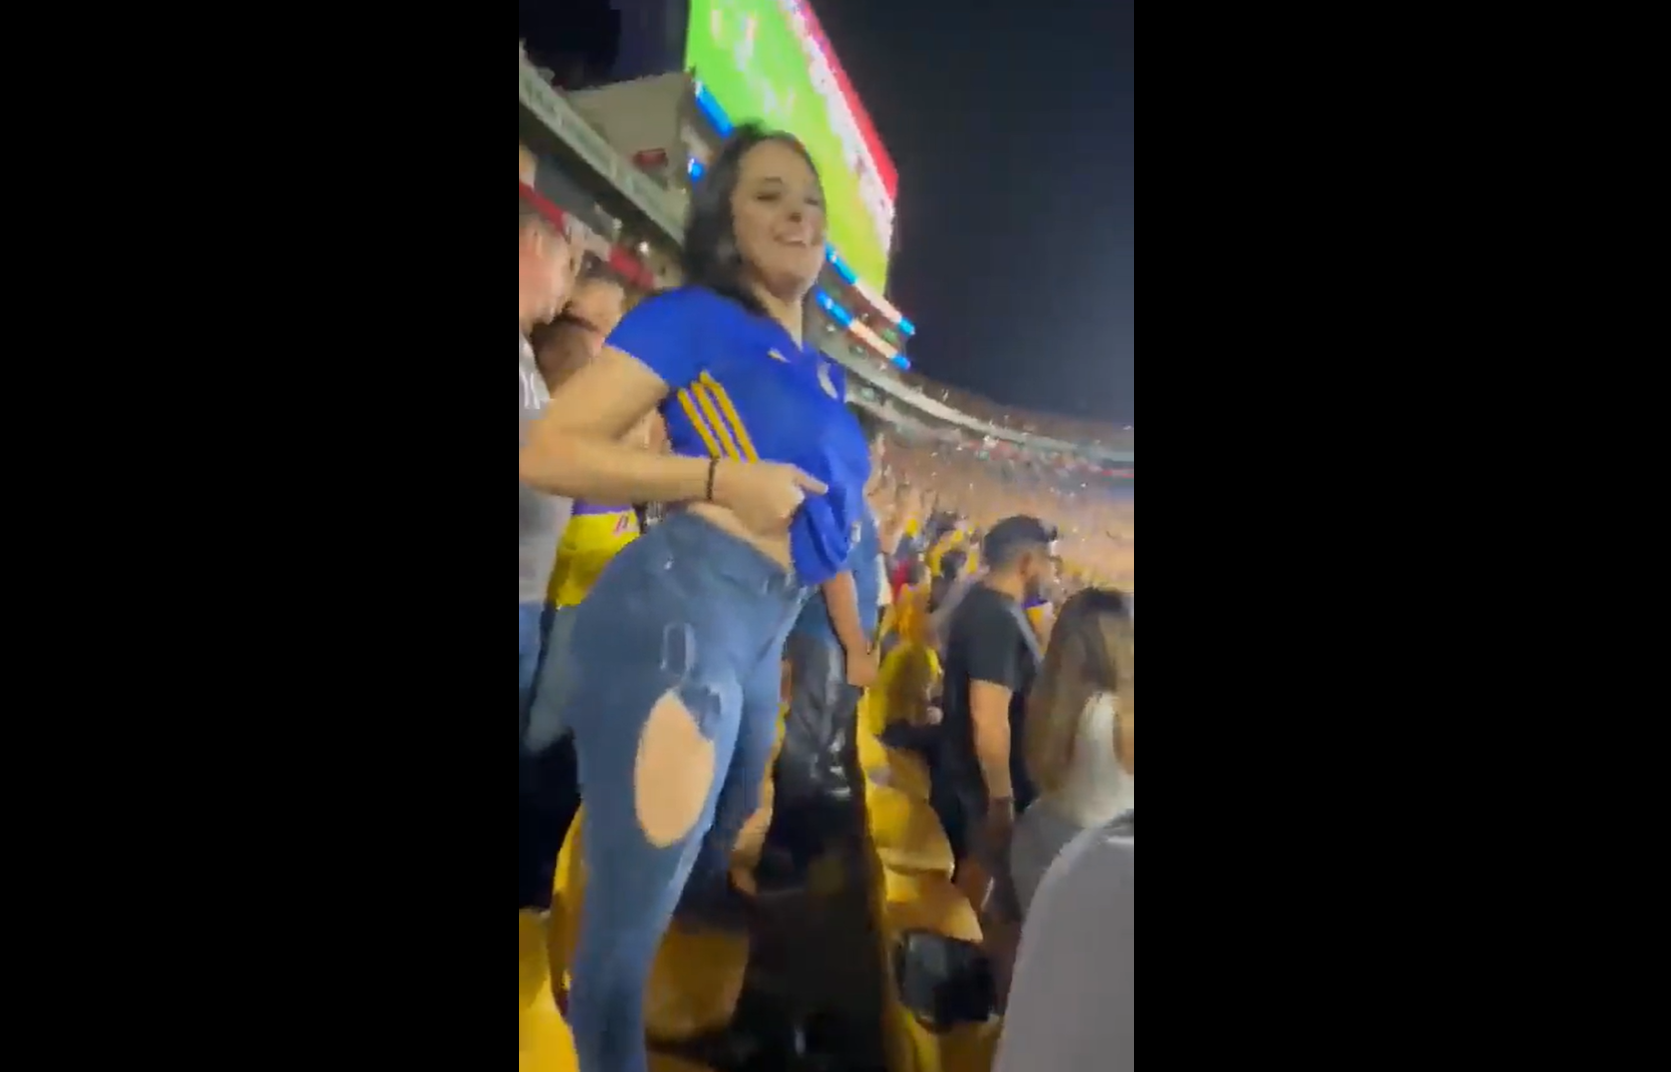 Woman Escorted Out Of Baseball Game For Accidental Nip Slip